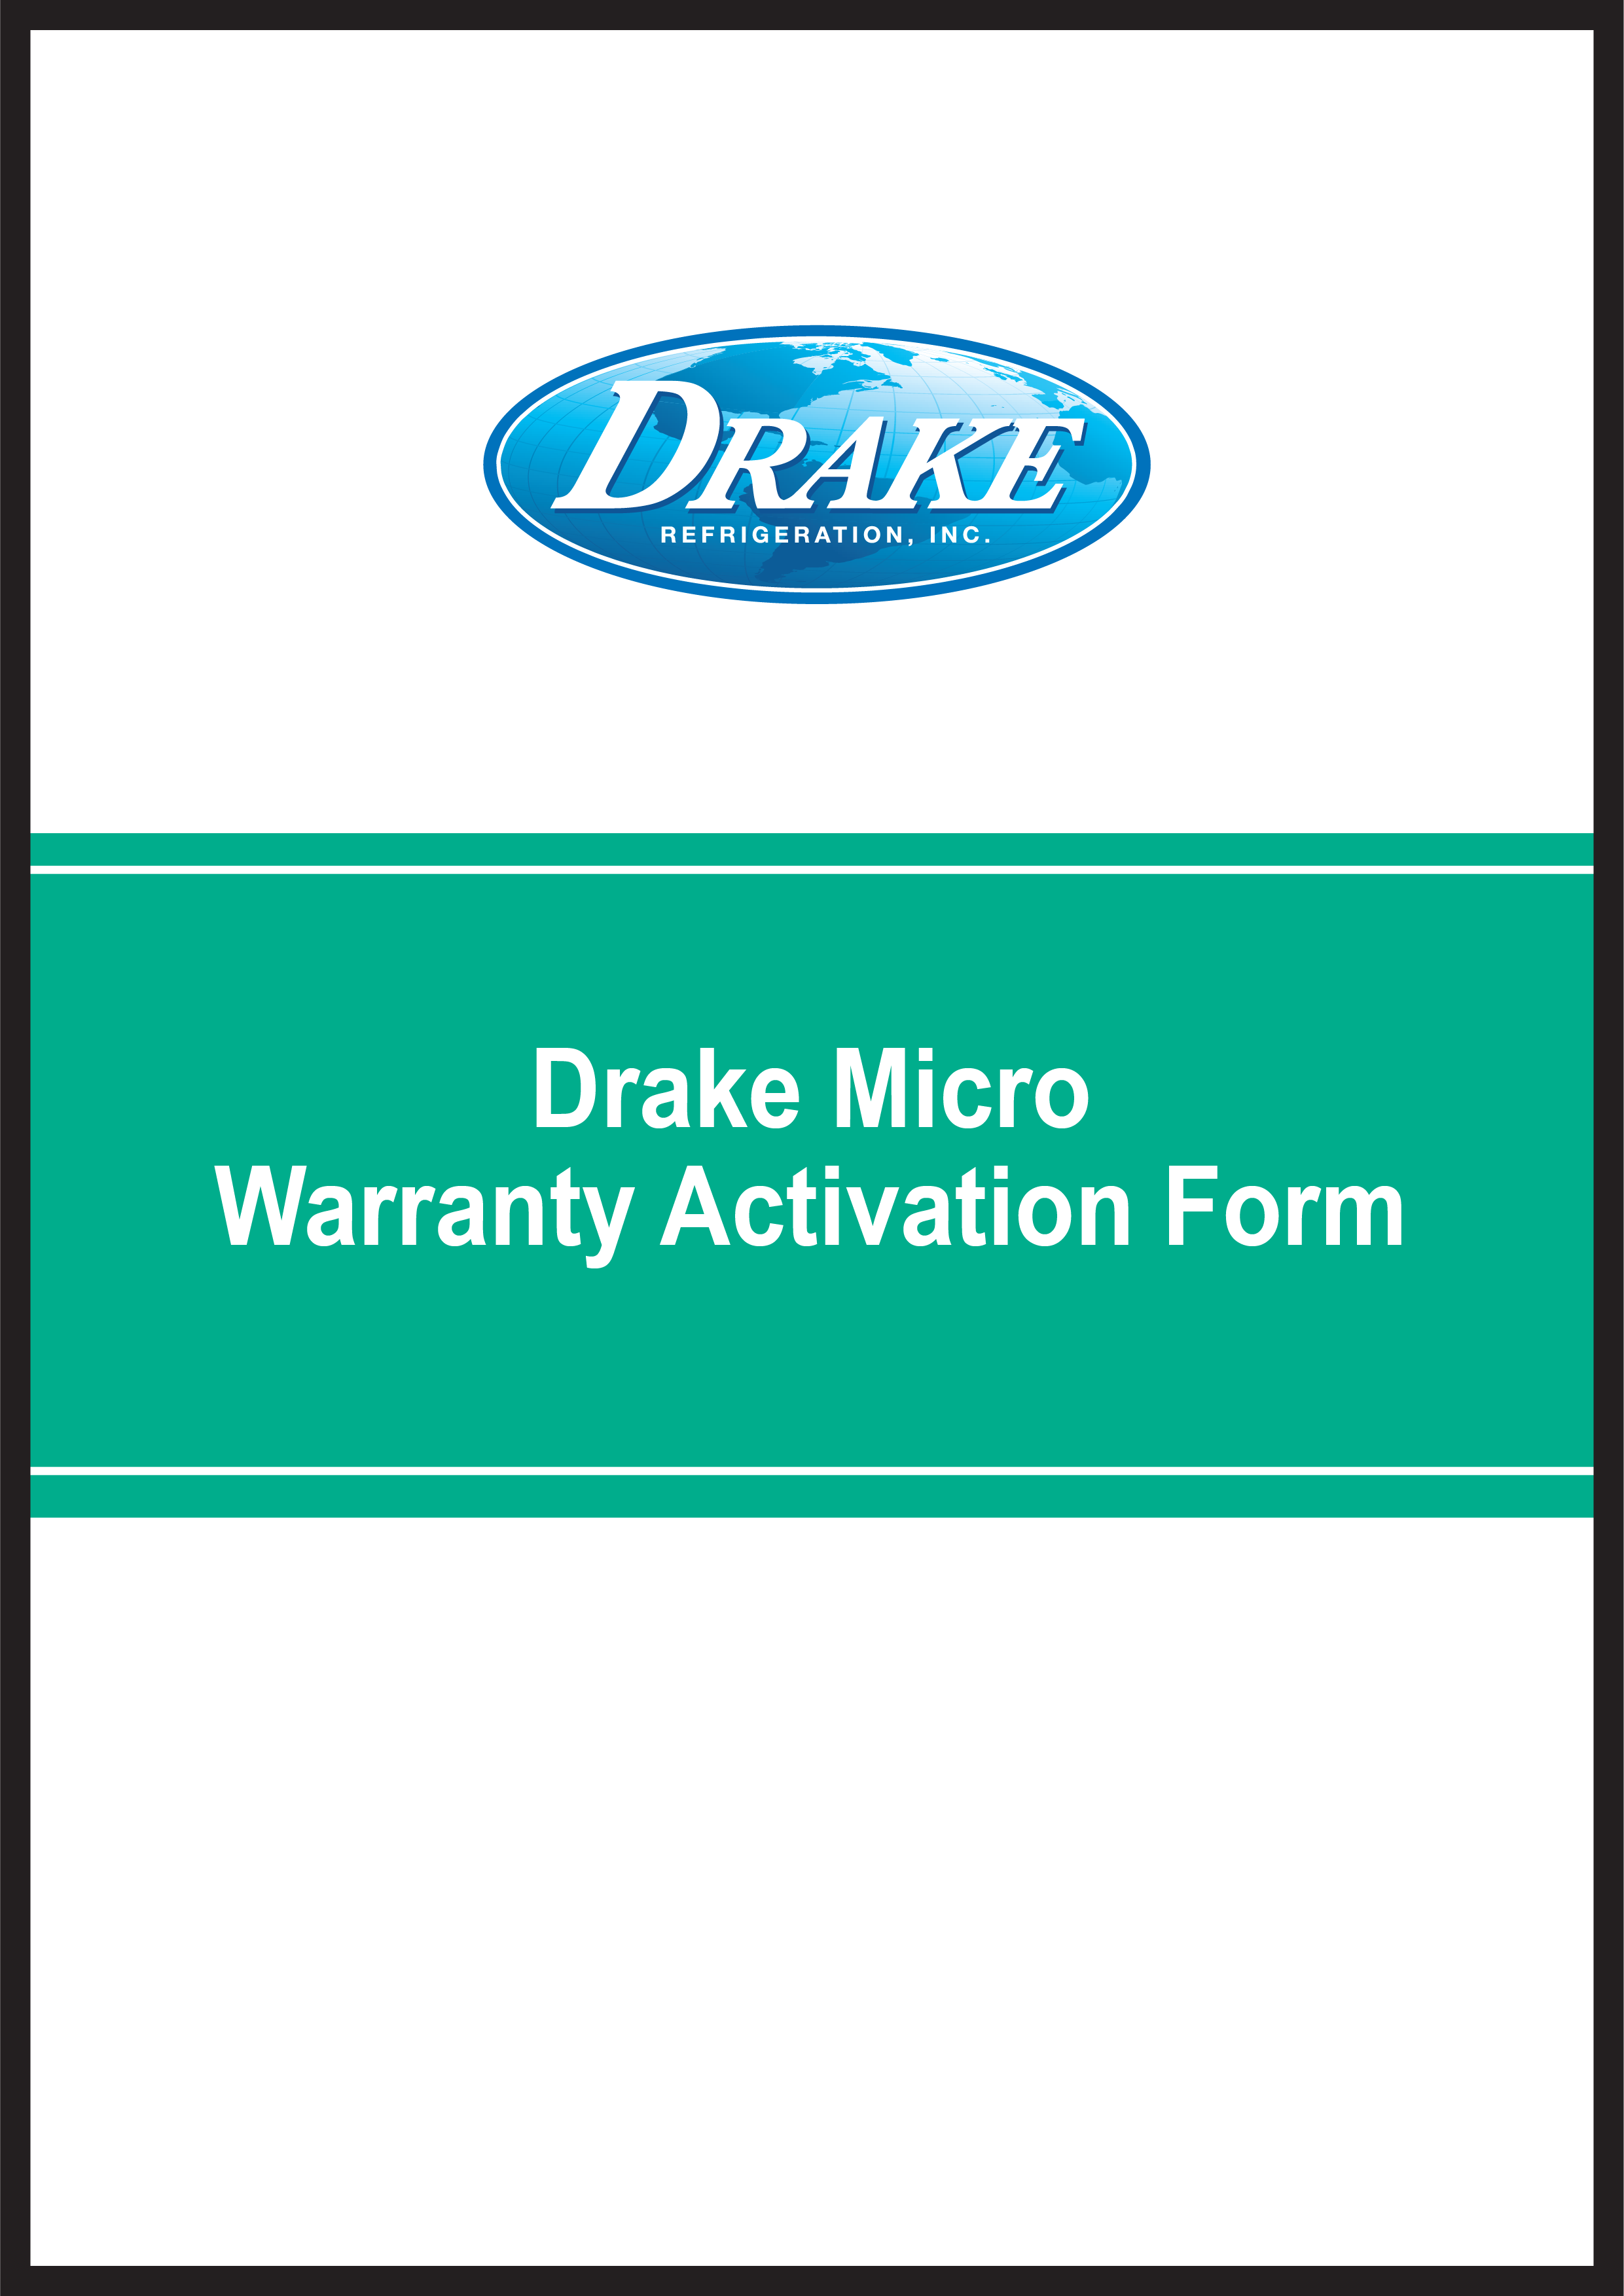 Web Template Drake Micro Warranty Activation Form.png